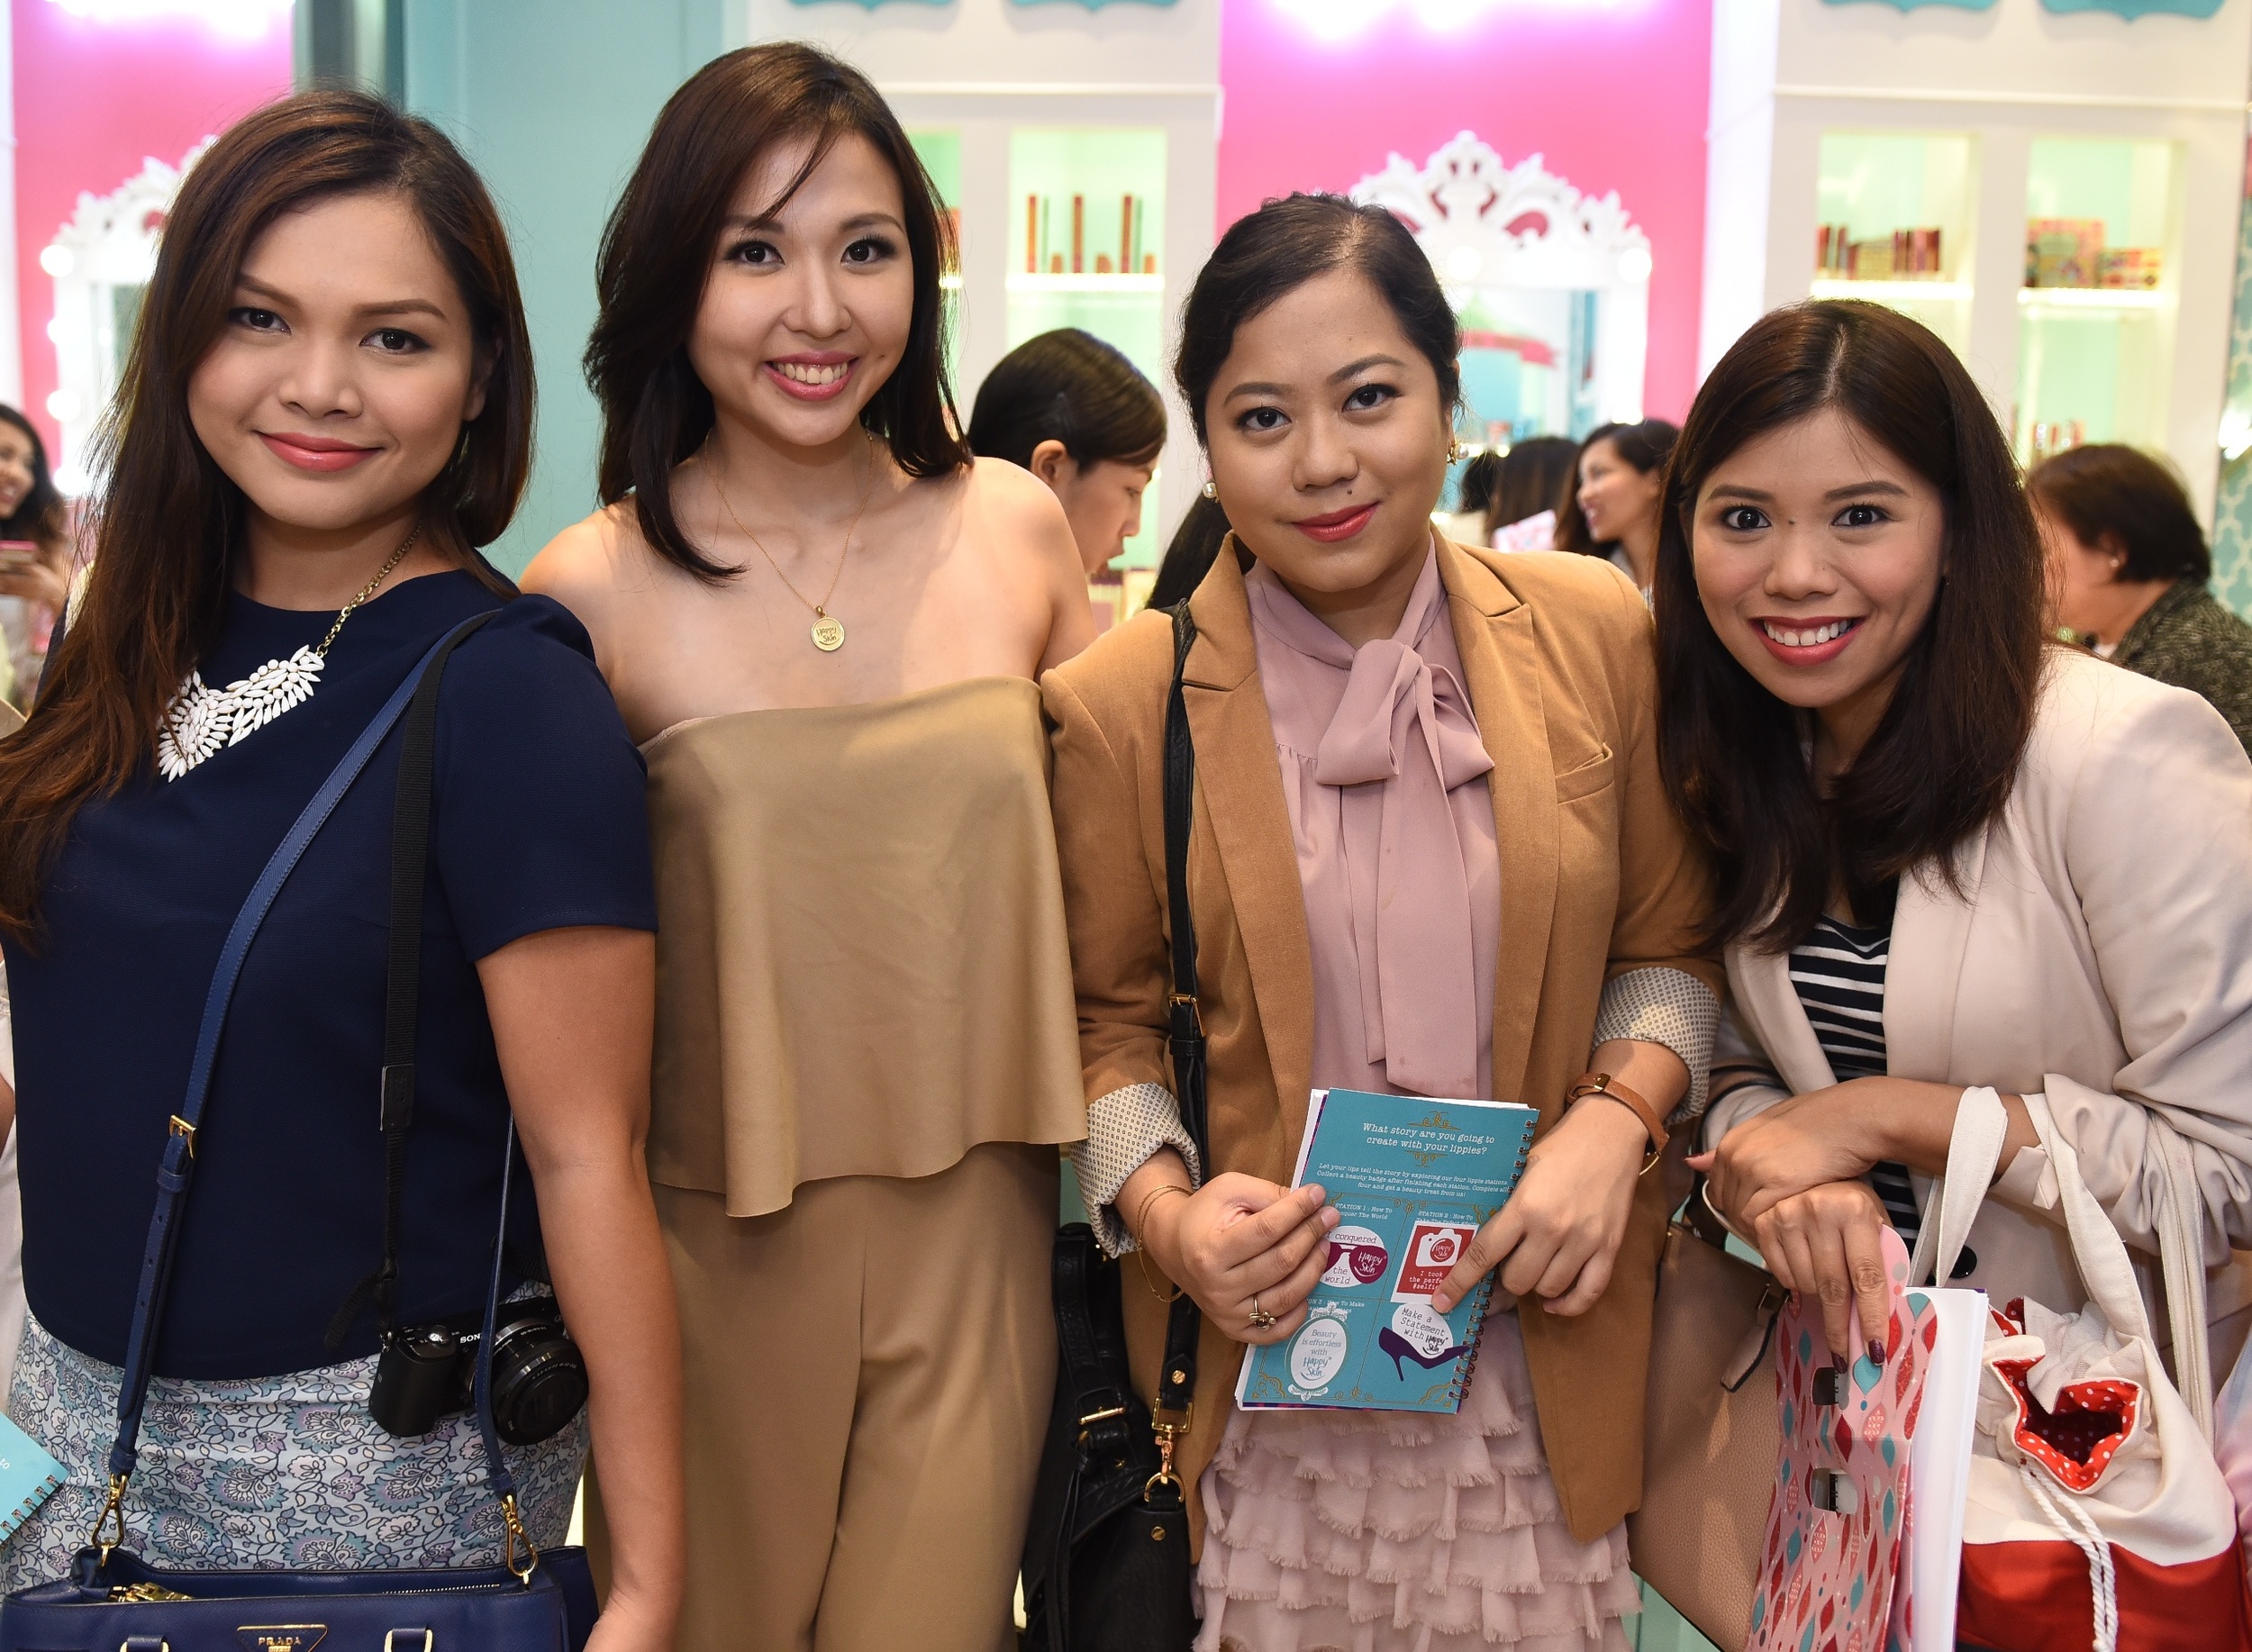  I got to visit with my fave bloggers Martha and Donna, with Happy Skin co-founder Jacqe Yuengtian-Gutierrez 